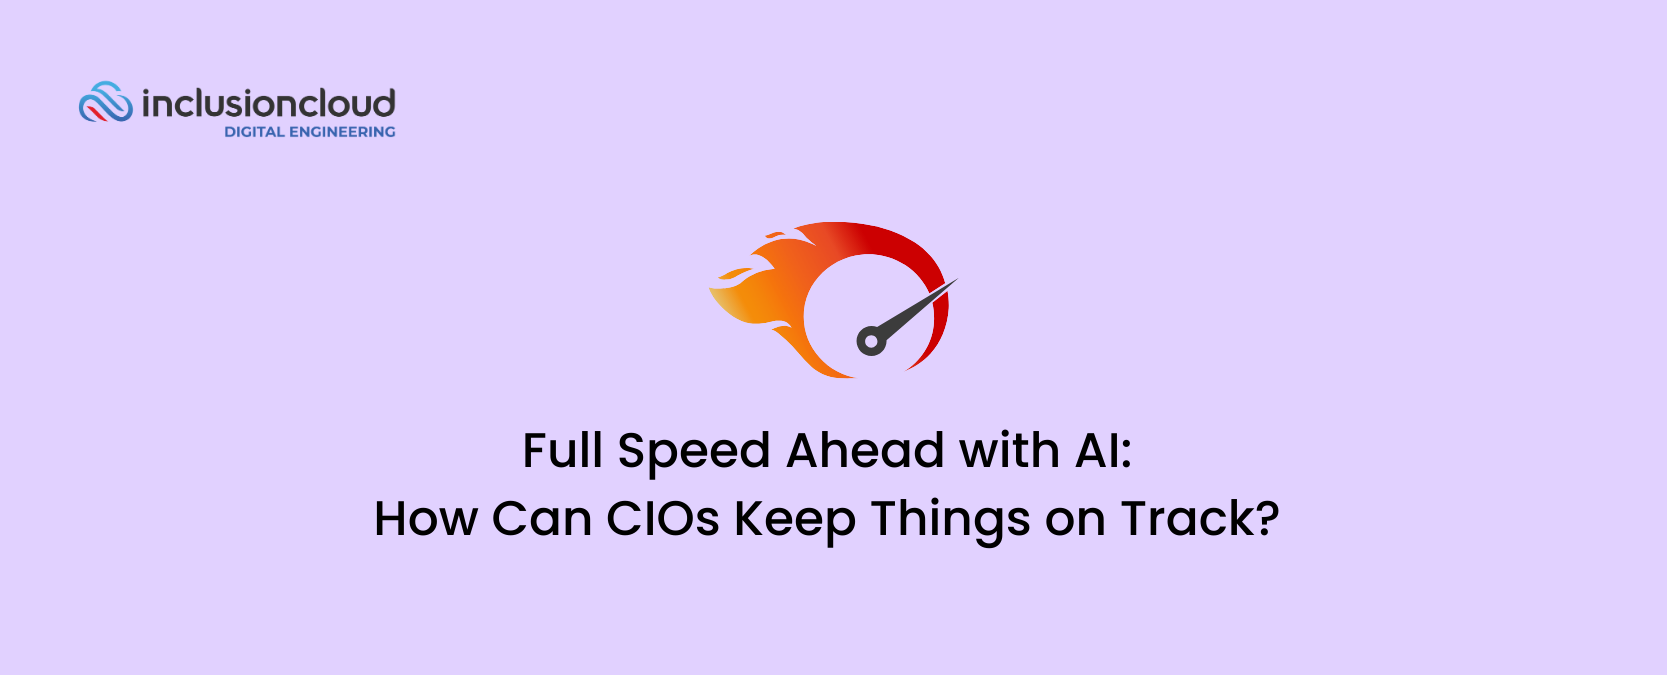 How Can CIOs Keep Things on Track